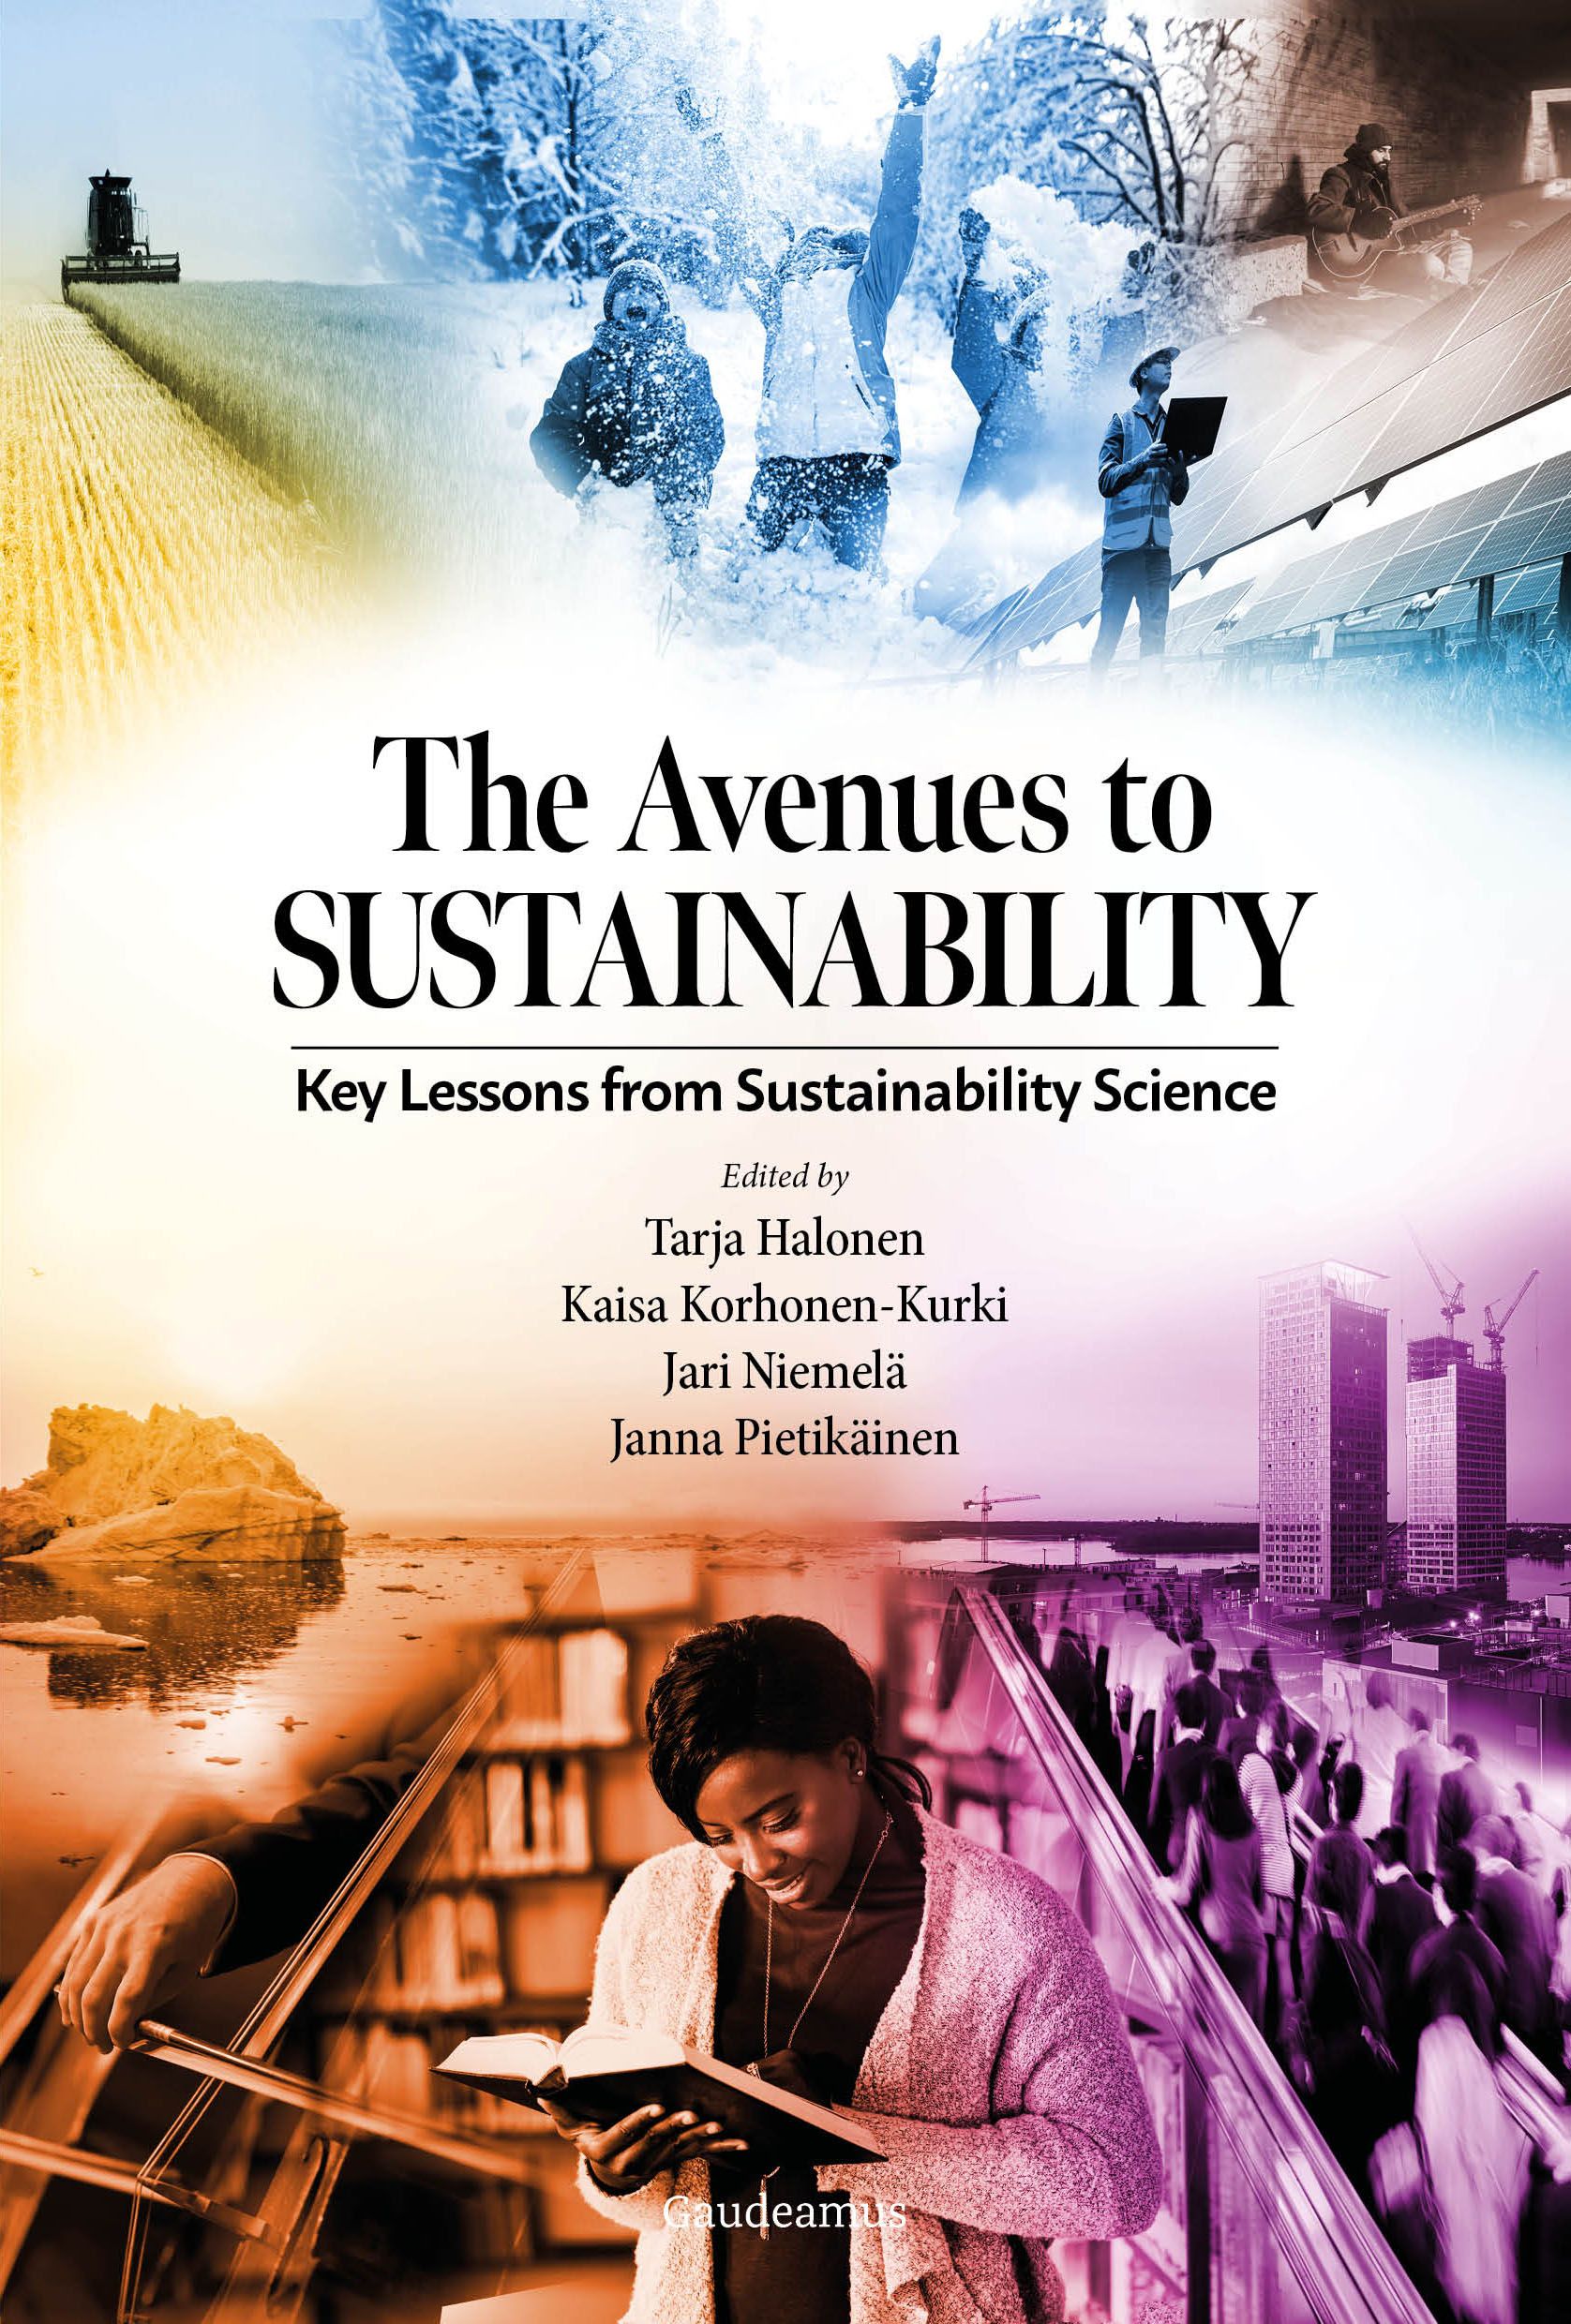 The Avenues to Sustainability